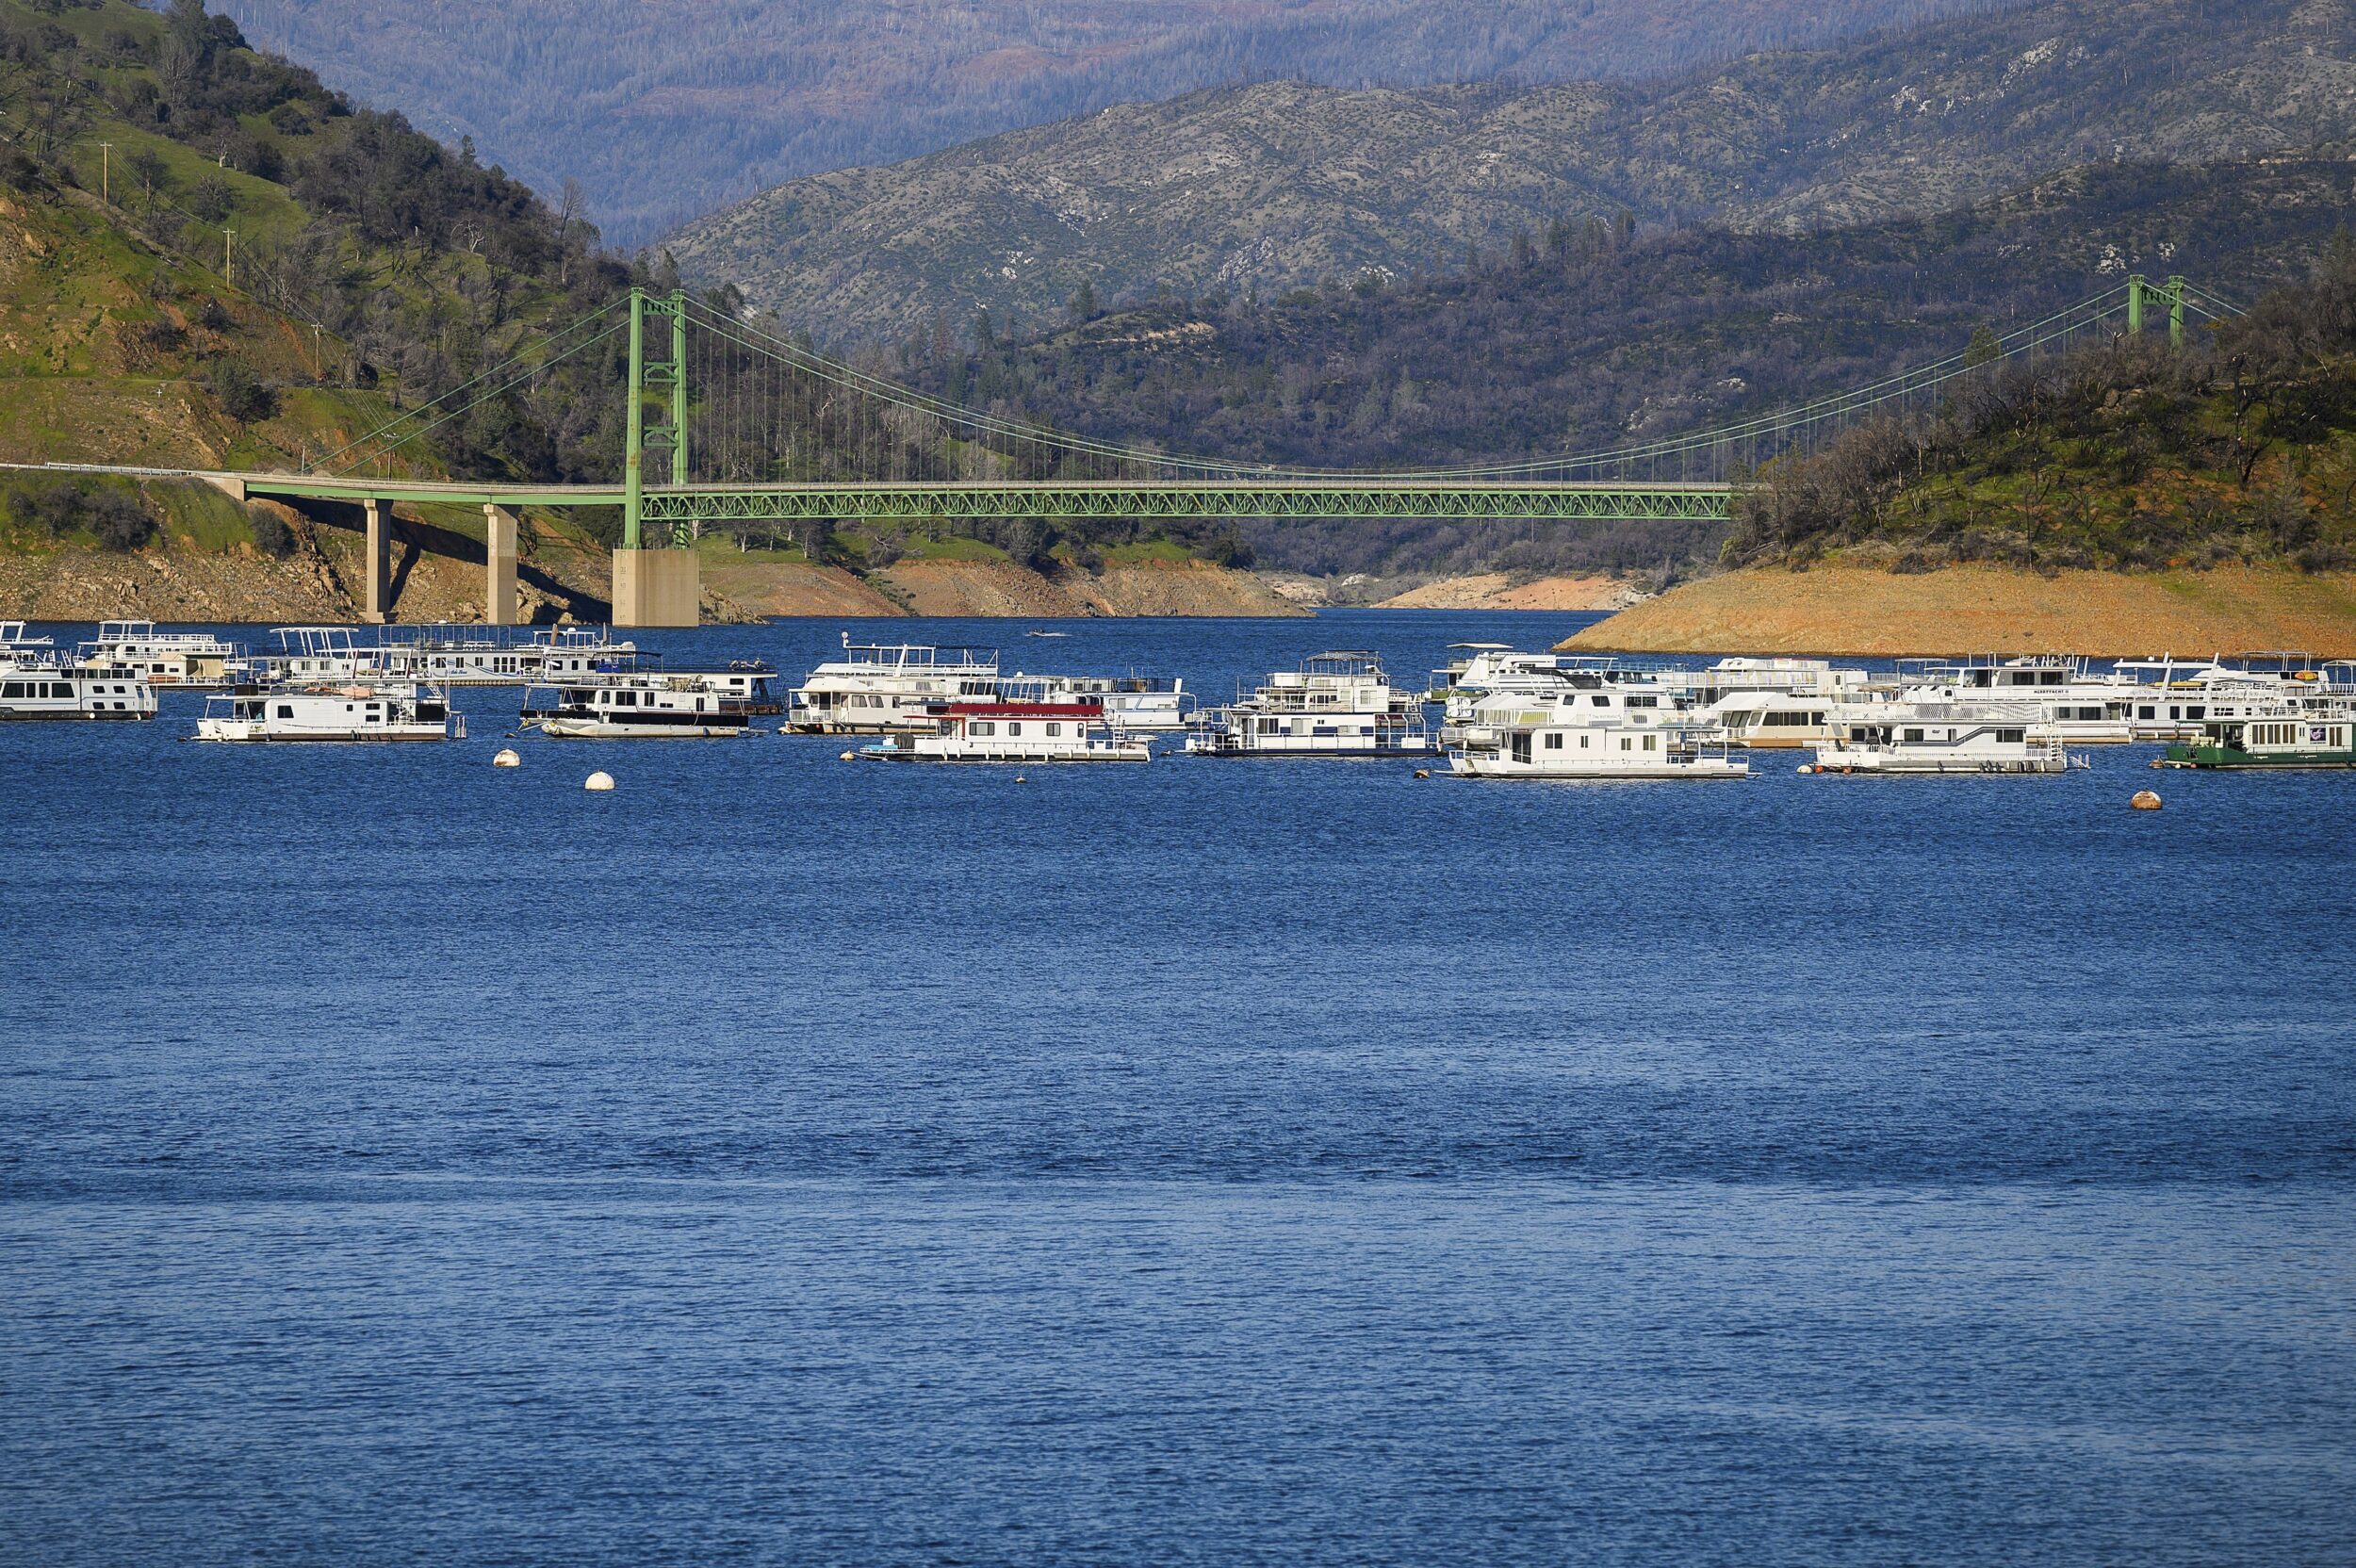 Houseboats moored on Oroville Lake with Bidwell Bridge in the background.